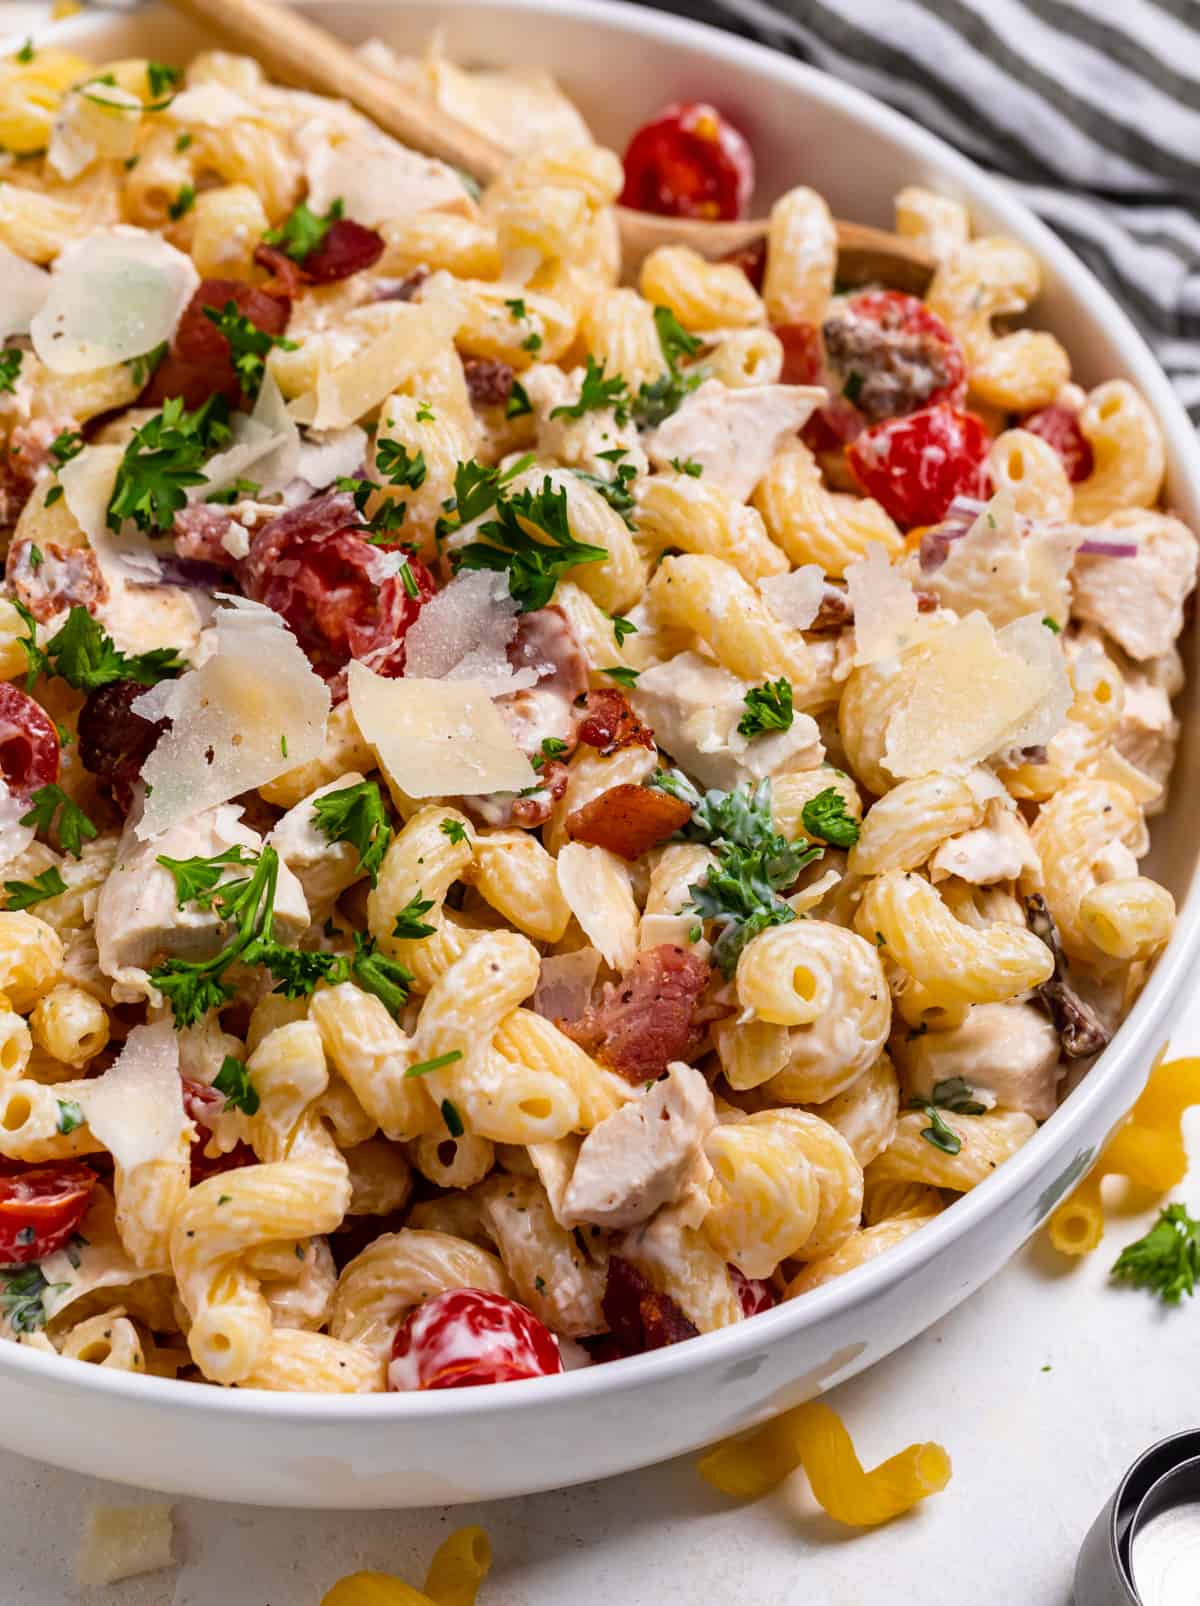 Chicken bacon ranch pasta salad in white serving dish topped with shaved parmesan and fresh parsley.